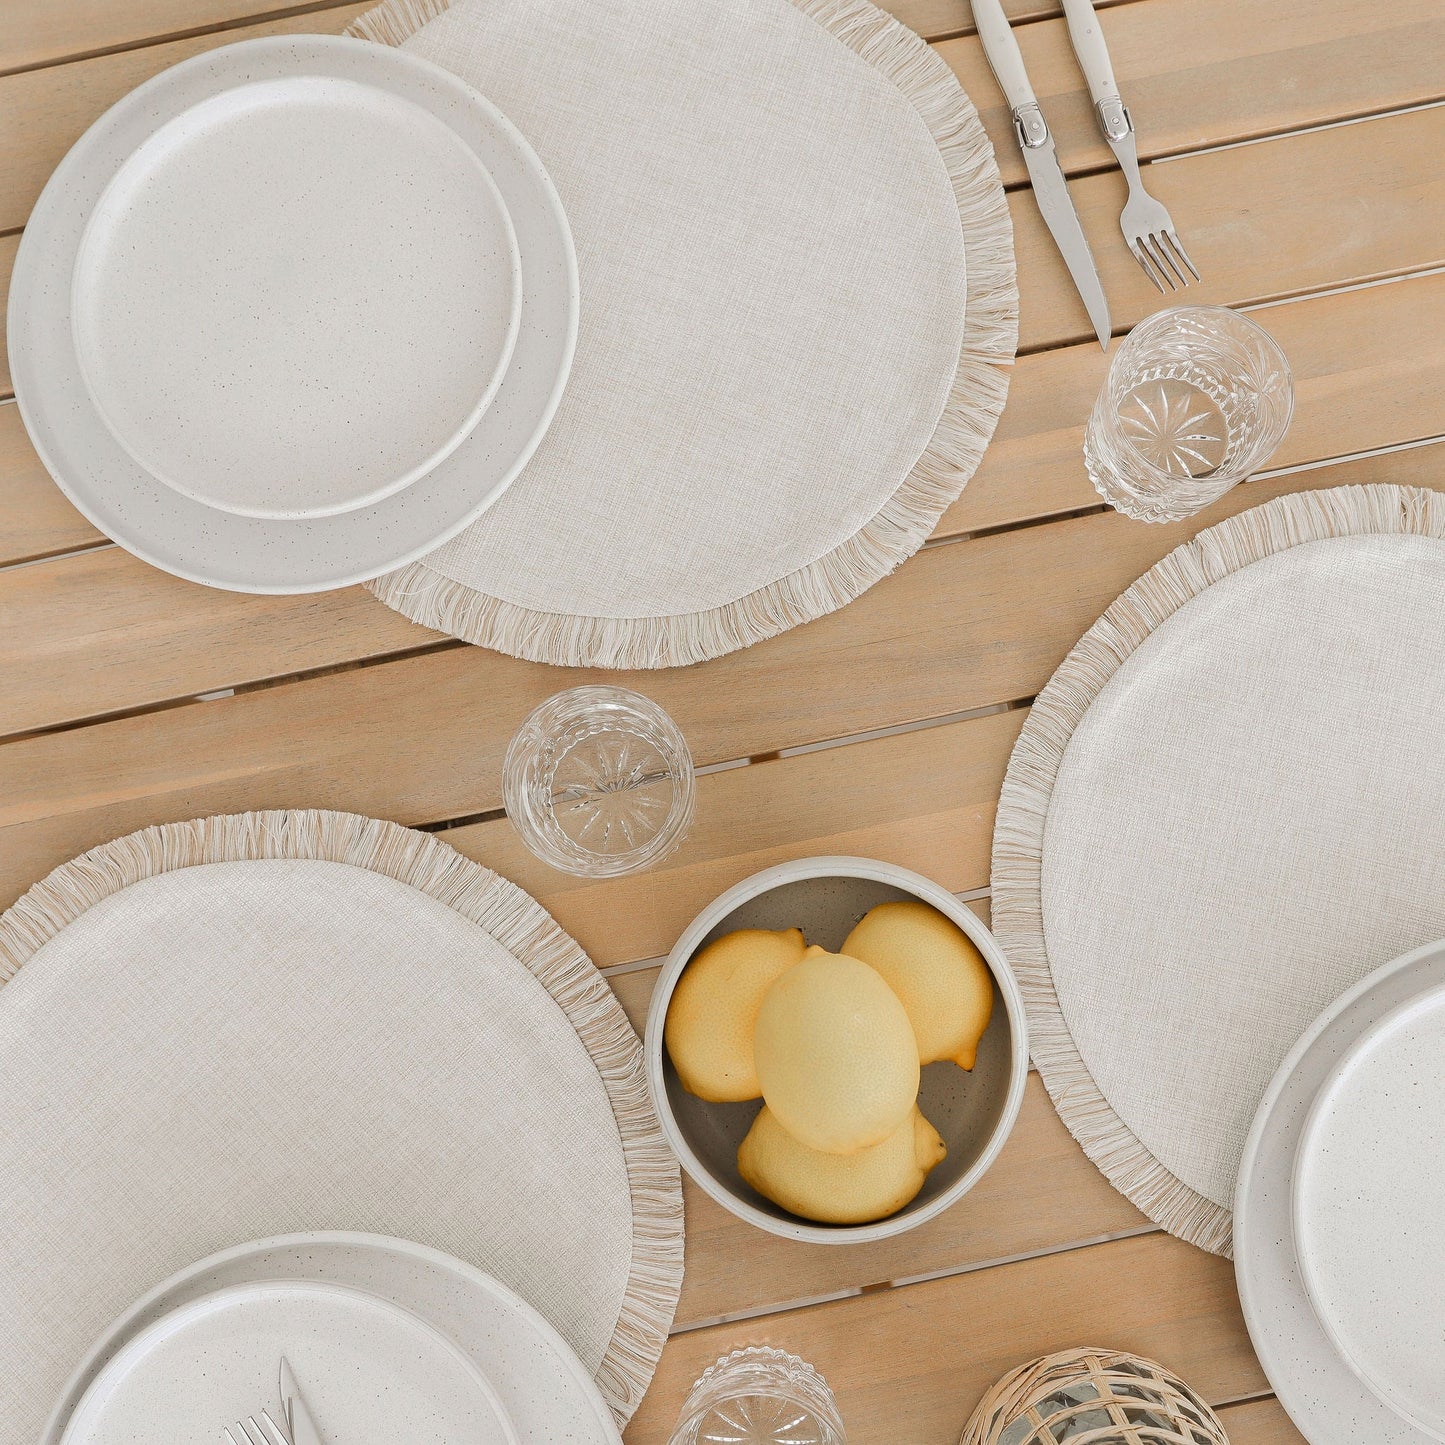 Round Placemat-Solid Natural-40cm